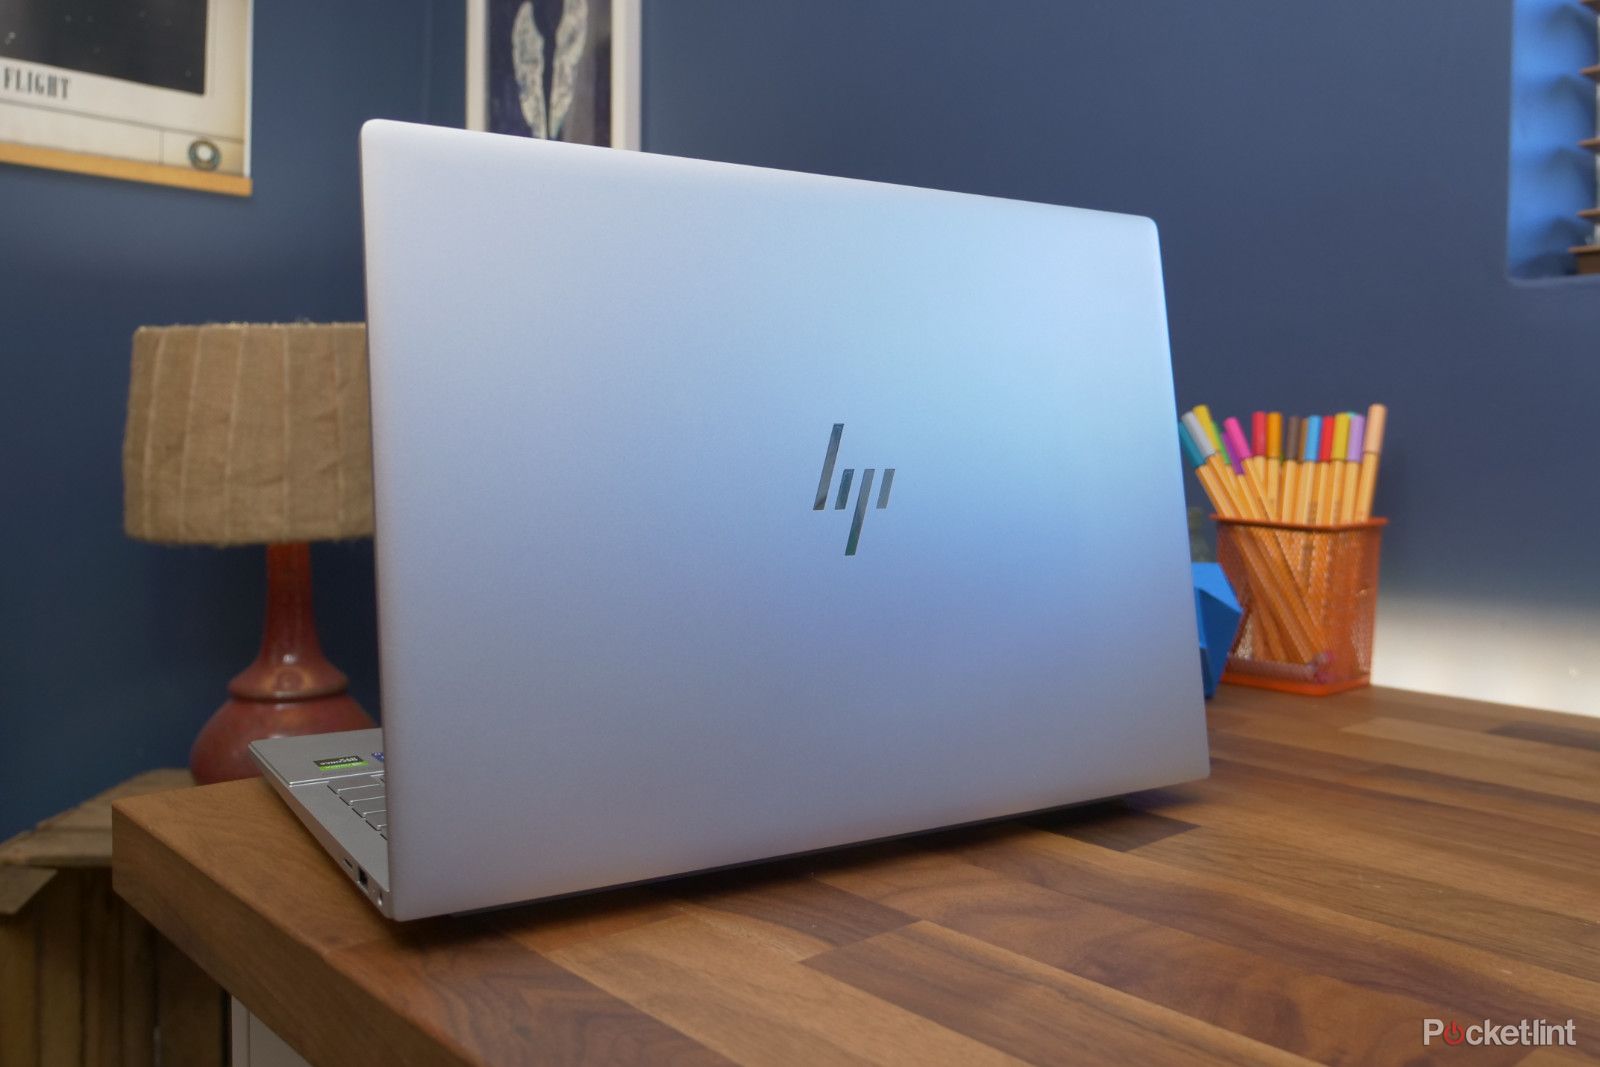 We will see new PC form factors driven by the pandemic and hybrid working, says HP photo 1